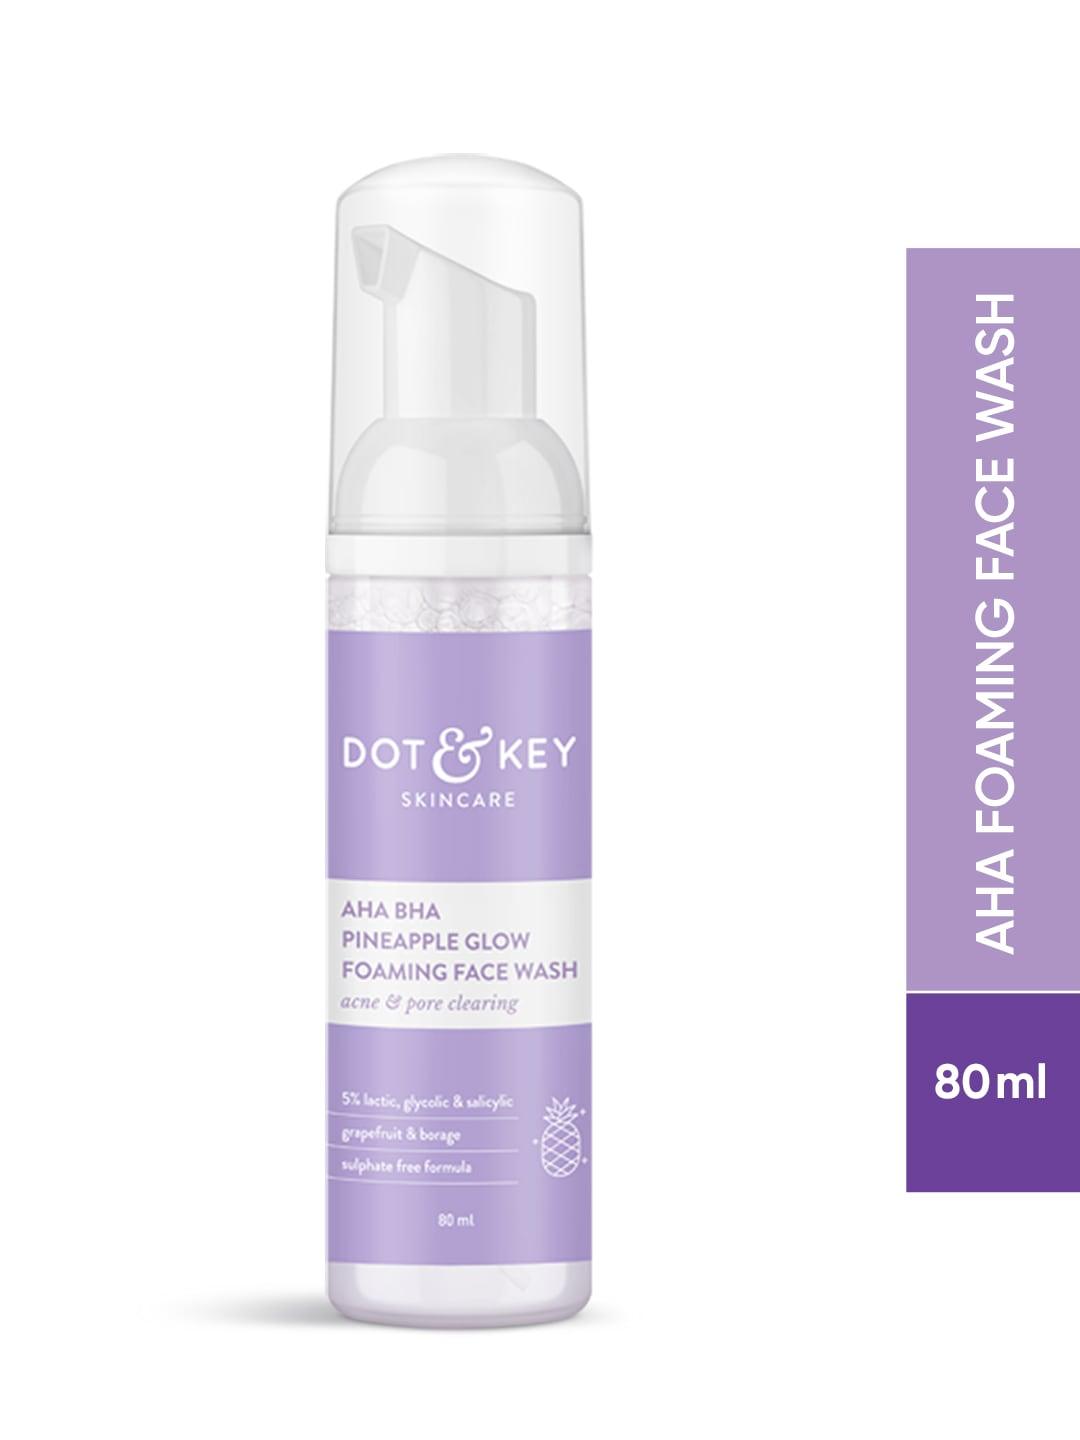 DOT & KEY AHA BHA Pineapple Glow Foaming Face Wash for Acne & Pores Clearing - 80ml